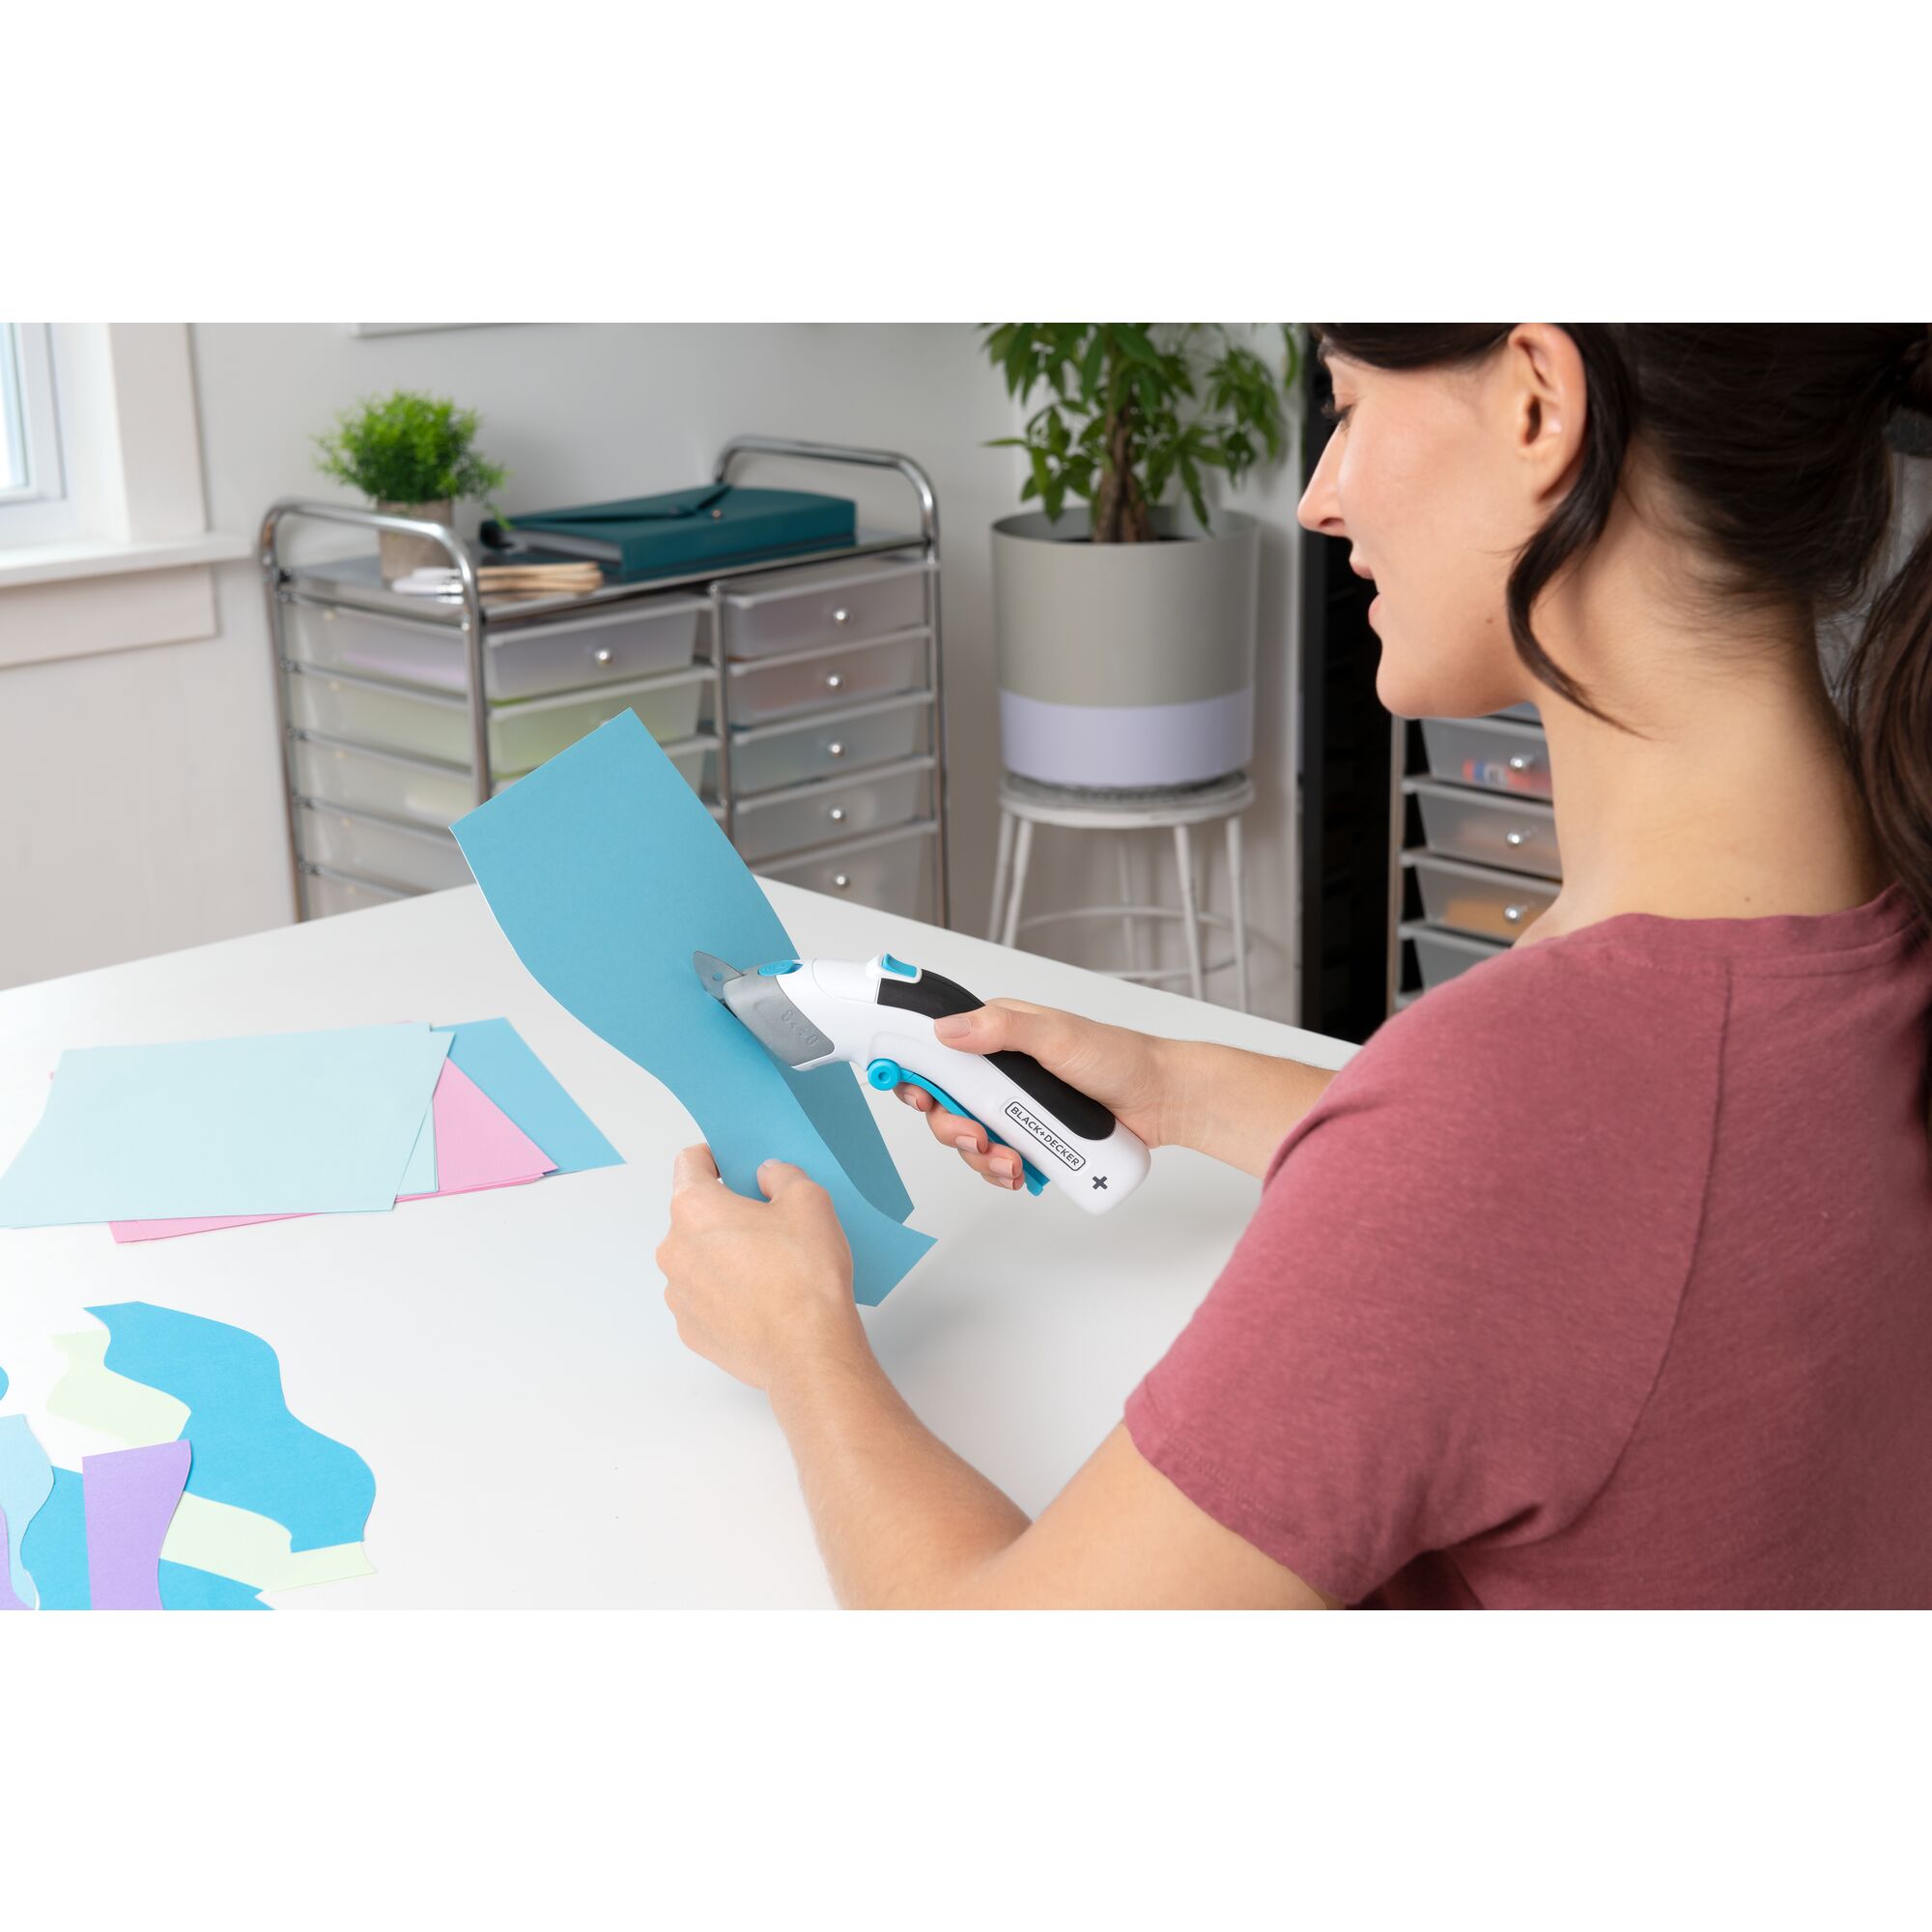 woman sitting in a craft room using BLACK+DECKER cordless power scissors to cut curved strips of colored paper